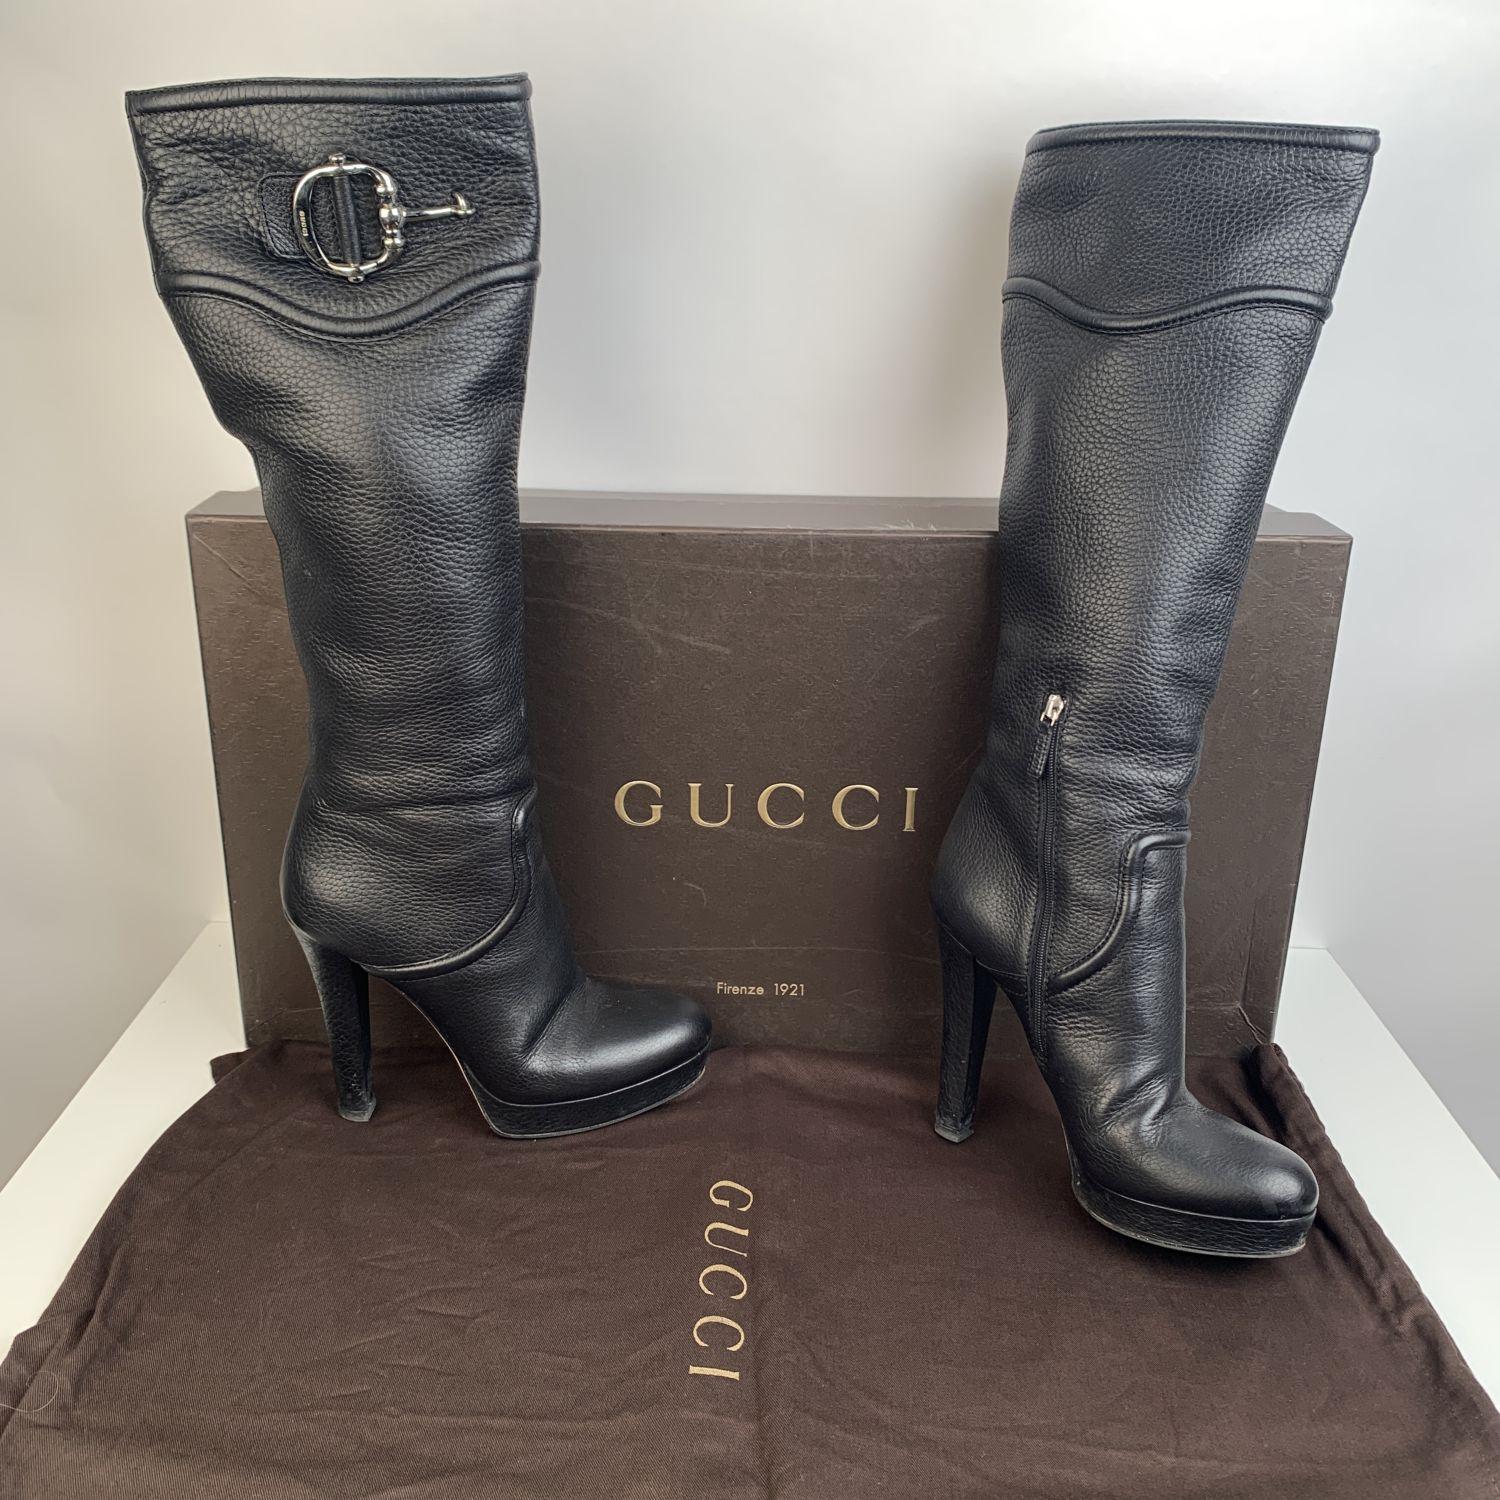 Gucci knee high boots in black leather. Gold metal horsebit on the upper part. Side zip closure. Platform: 1 inches - 2,6 cm. Heels: 5 inches - 12,7 cm. Shaft height: 15.25 inches - 38.7 cm. Almond toes. Size: 40 (The size shown for this item is the